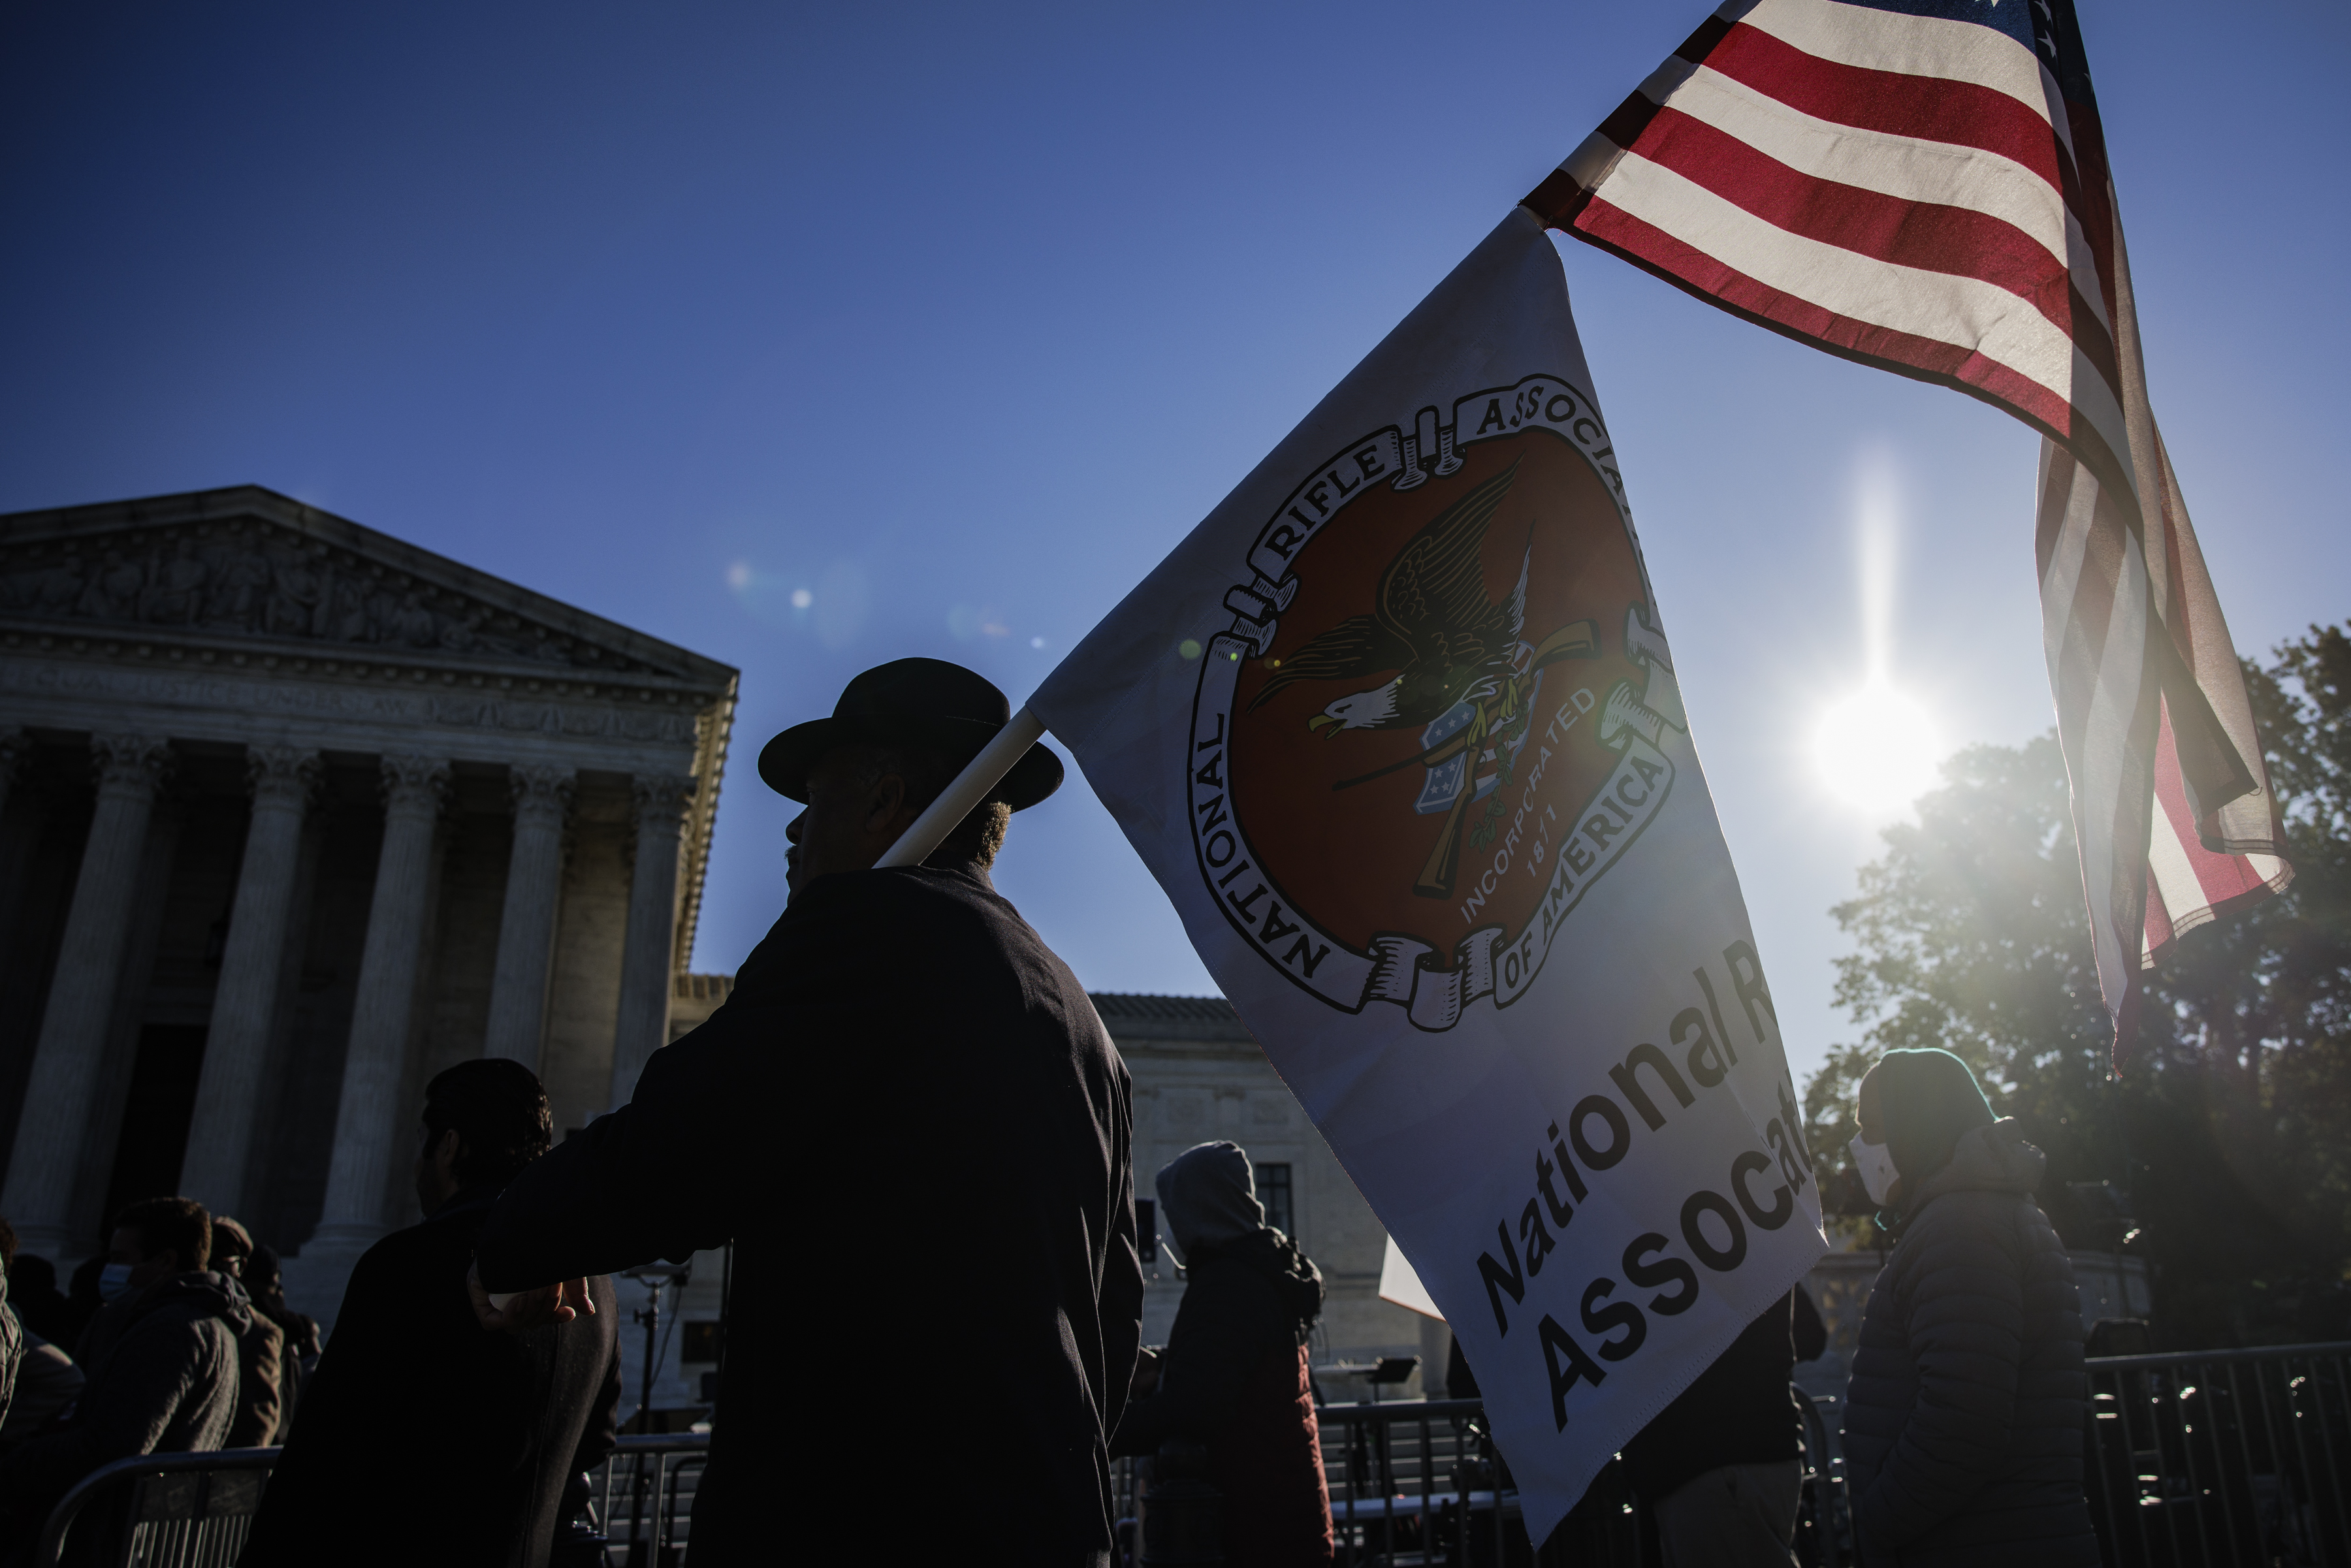 A Second Amendment demonstrator holds American and National Rifle Association (NRA) flags outside the Supreme Court on Wednesday.